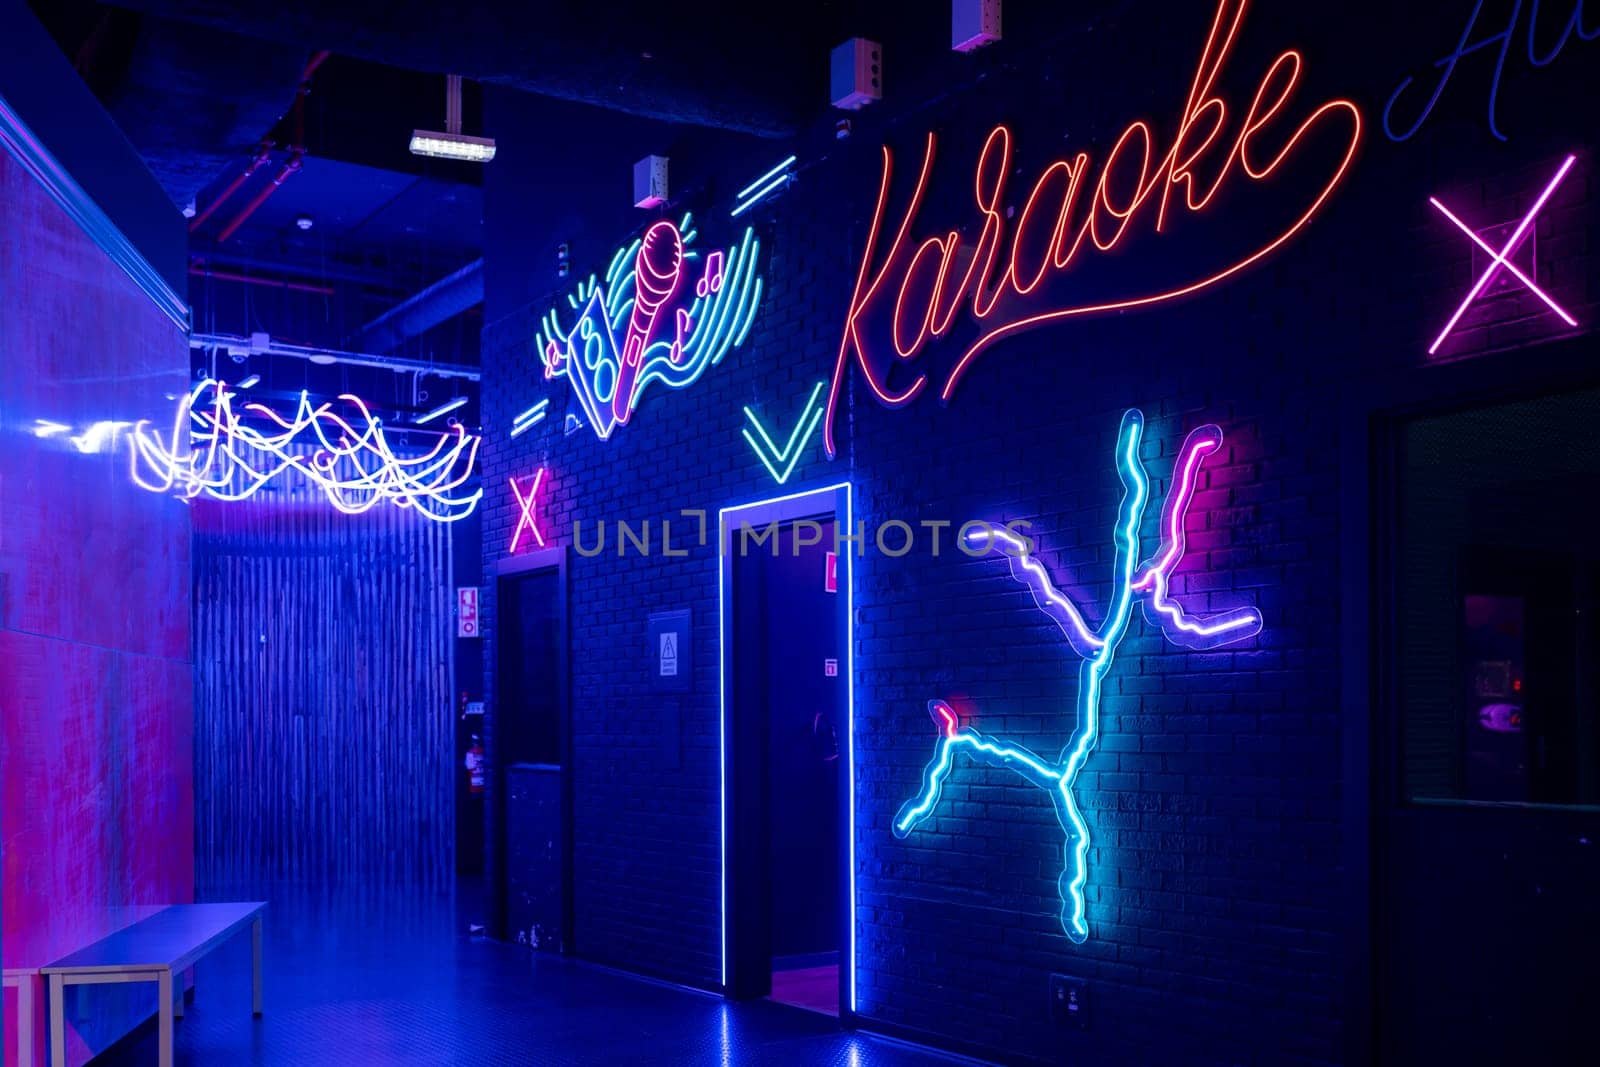 Glowing neon sign with word Karaoke and microphone mounted on brick wall, setting the scene for Karaoke night at illuminated arcade. Entertainment concept.